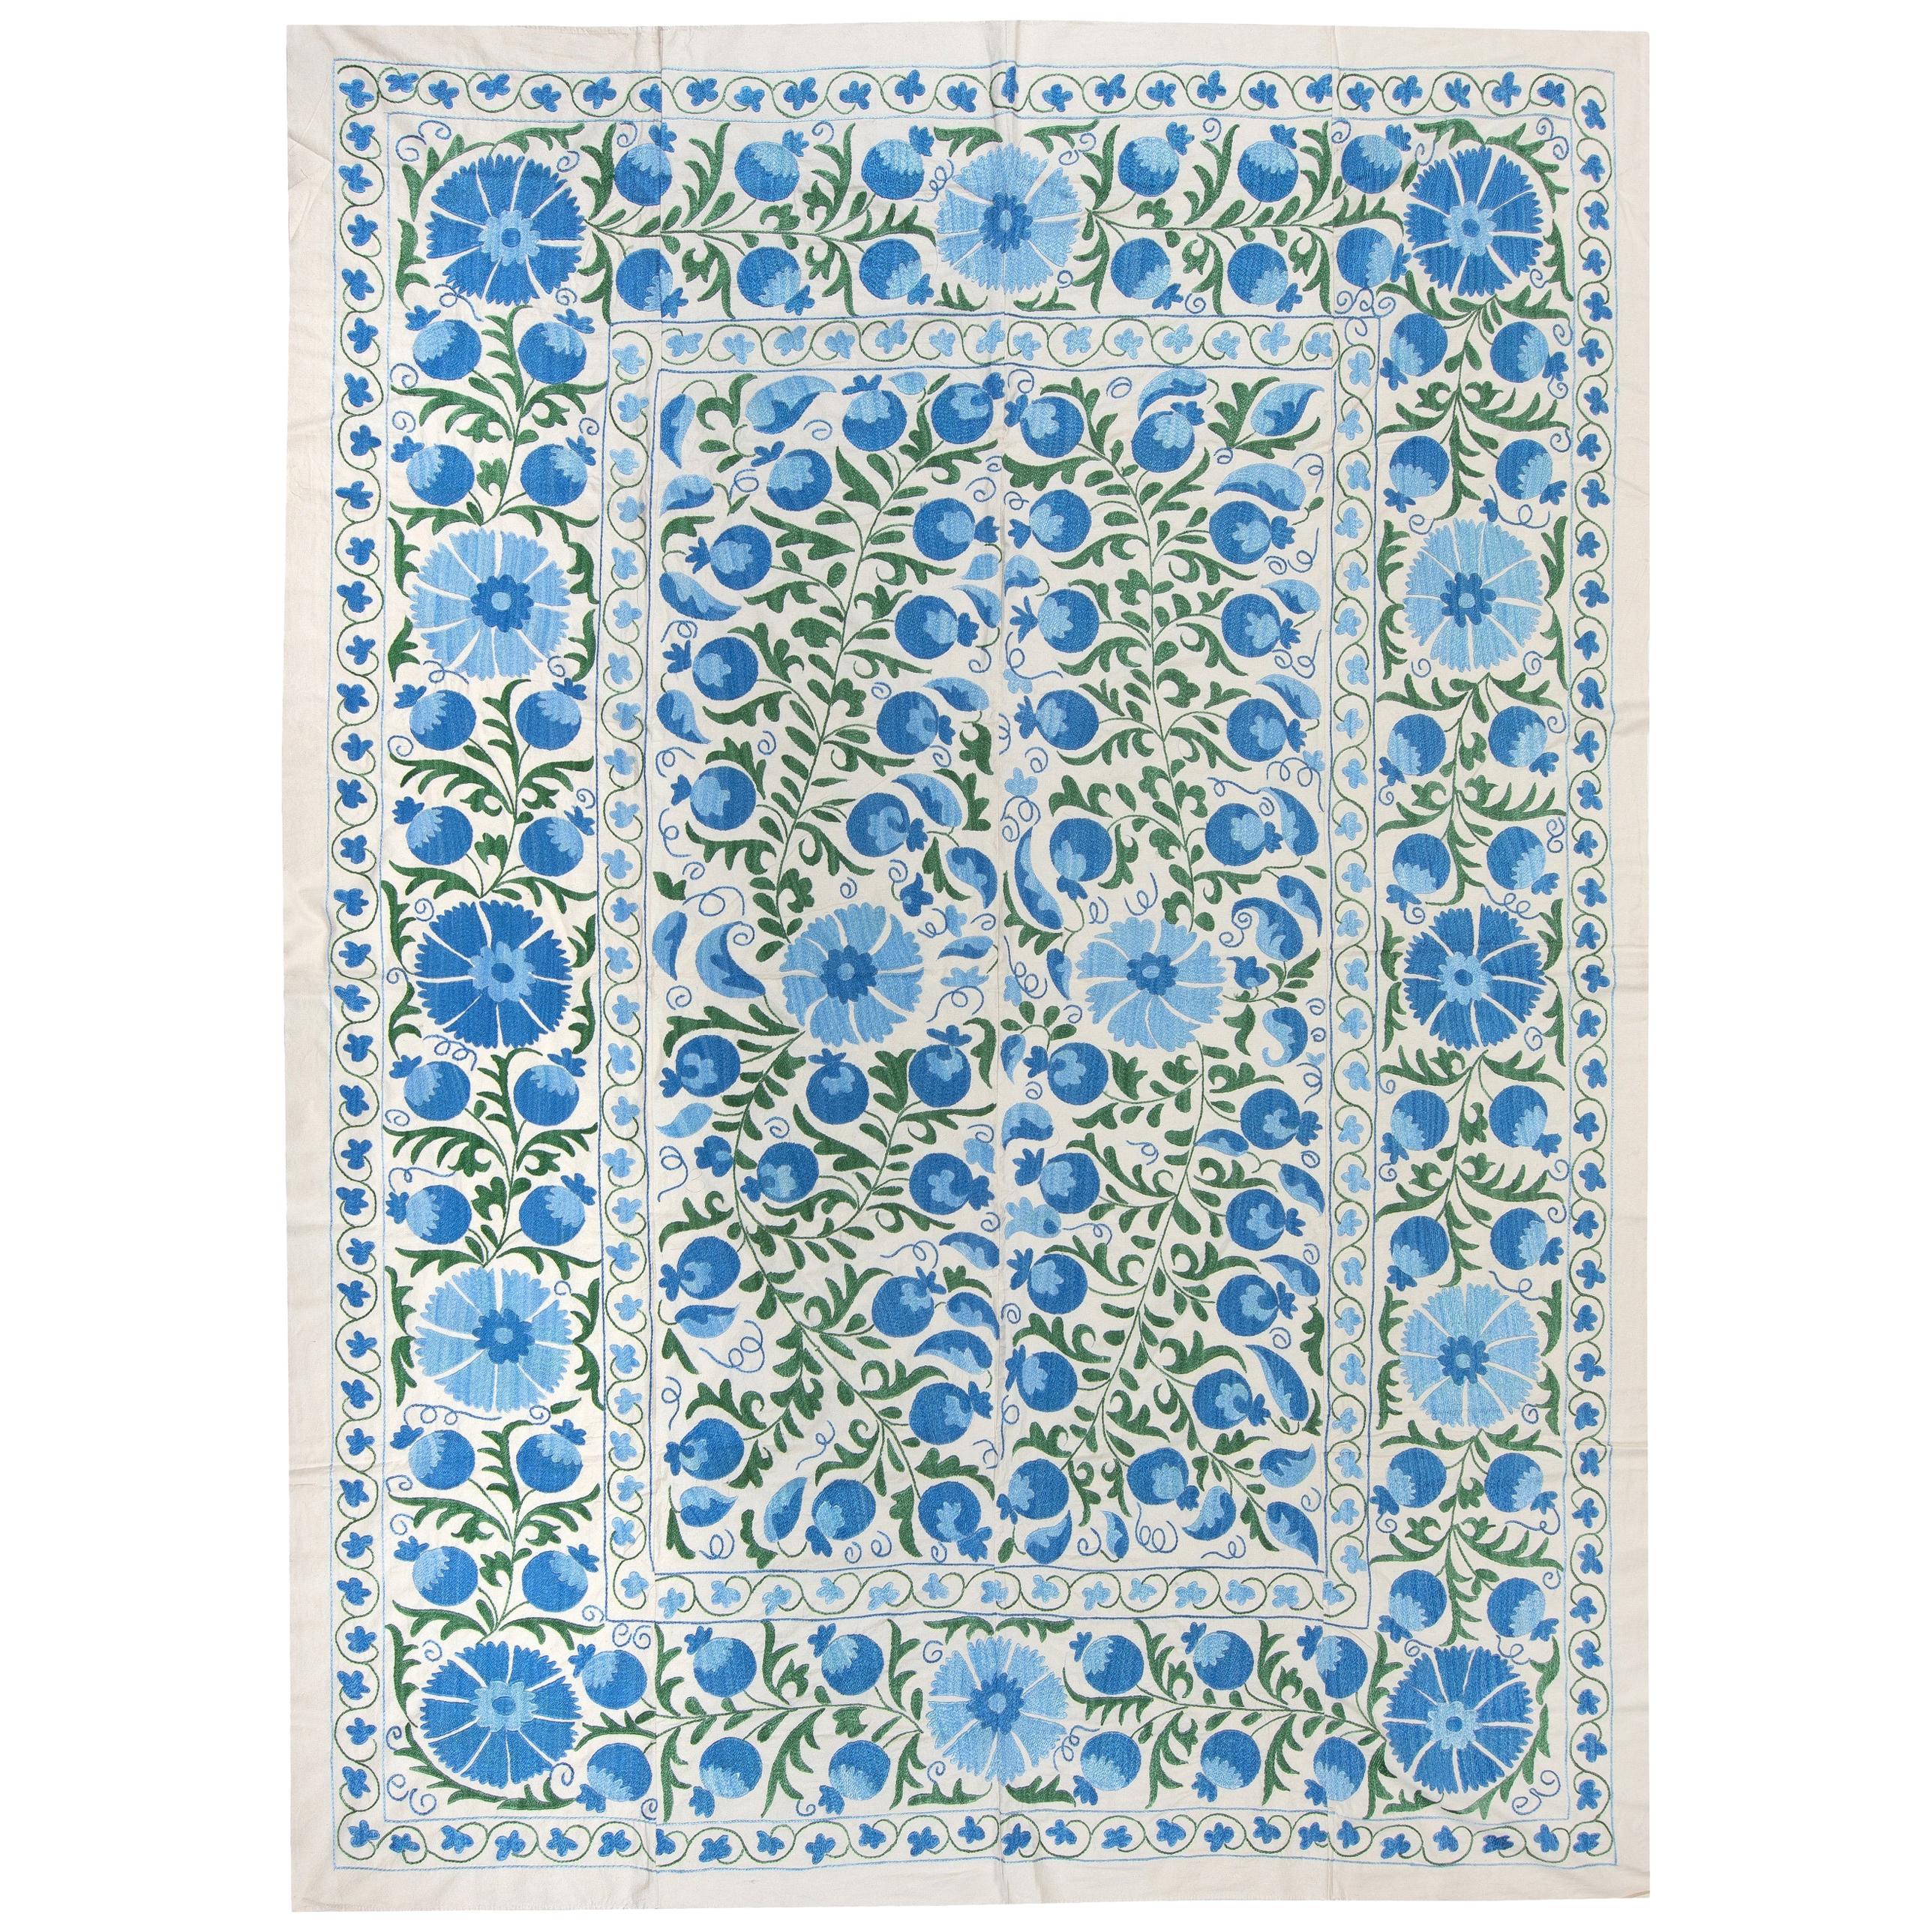 6.4x8.3 Ft Silk Embroidery Bedspread, Suzani Wall Hanging, Blue Uzbek Tapestry For Sale